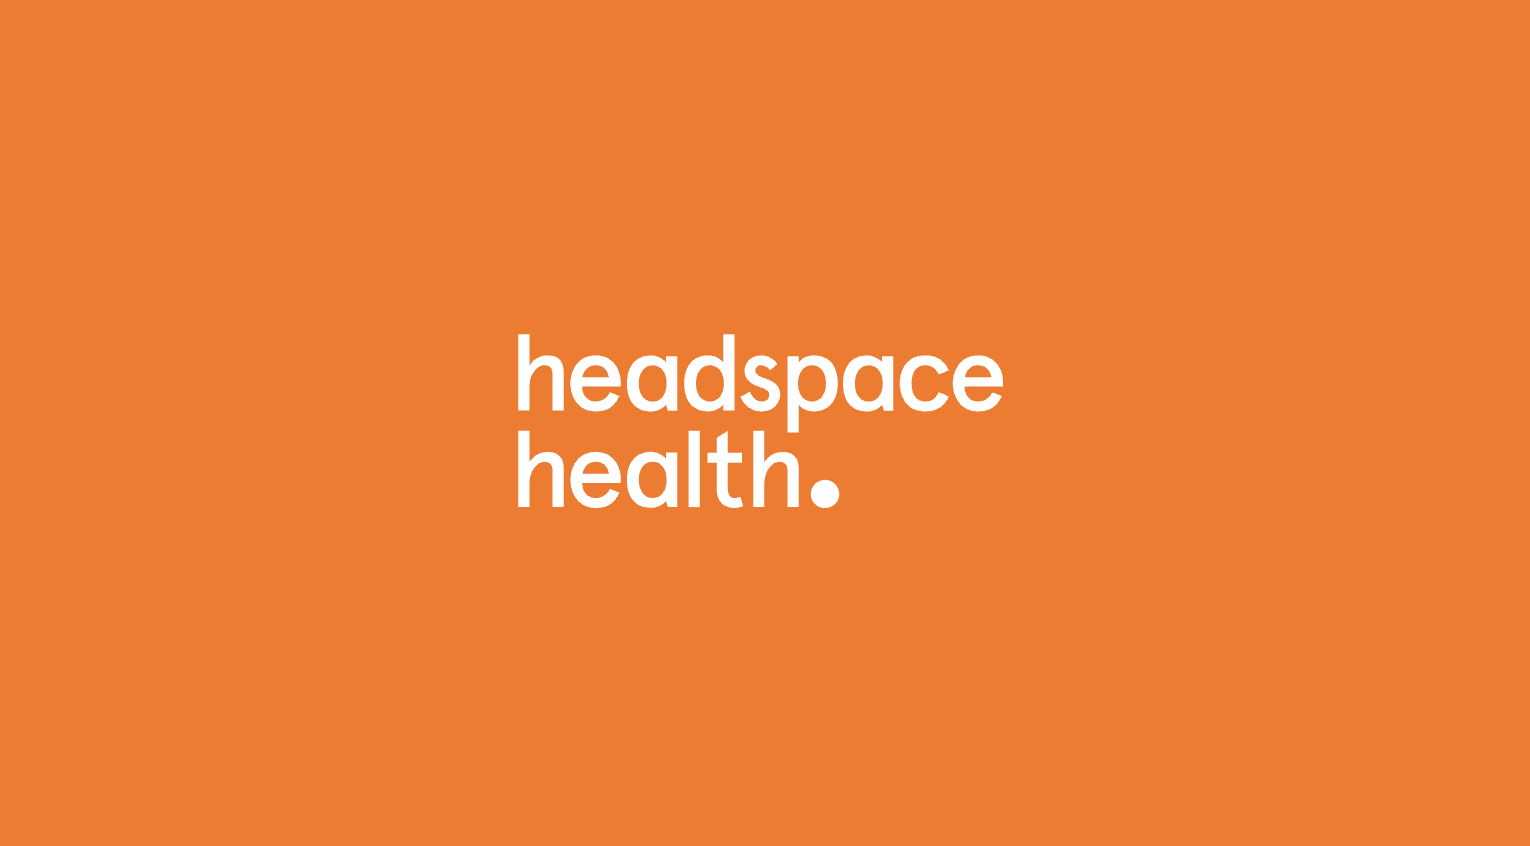 Headspace Health (Ginger) - vendor materials